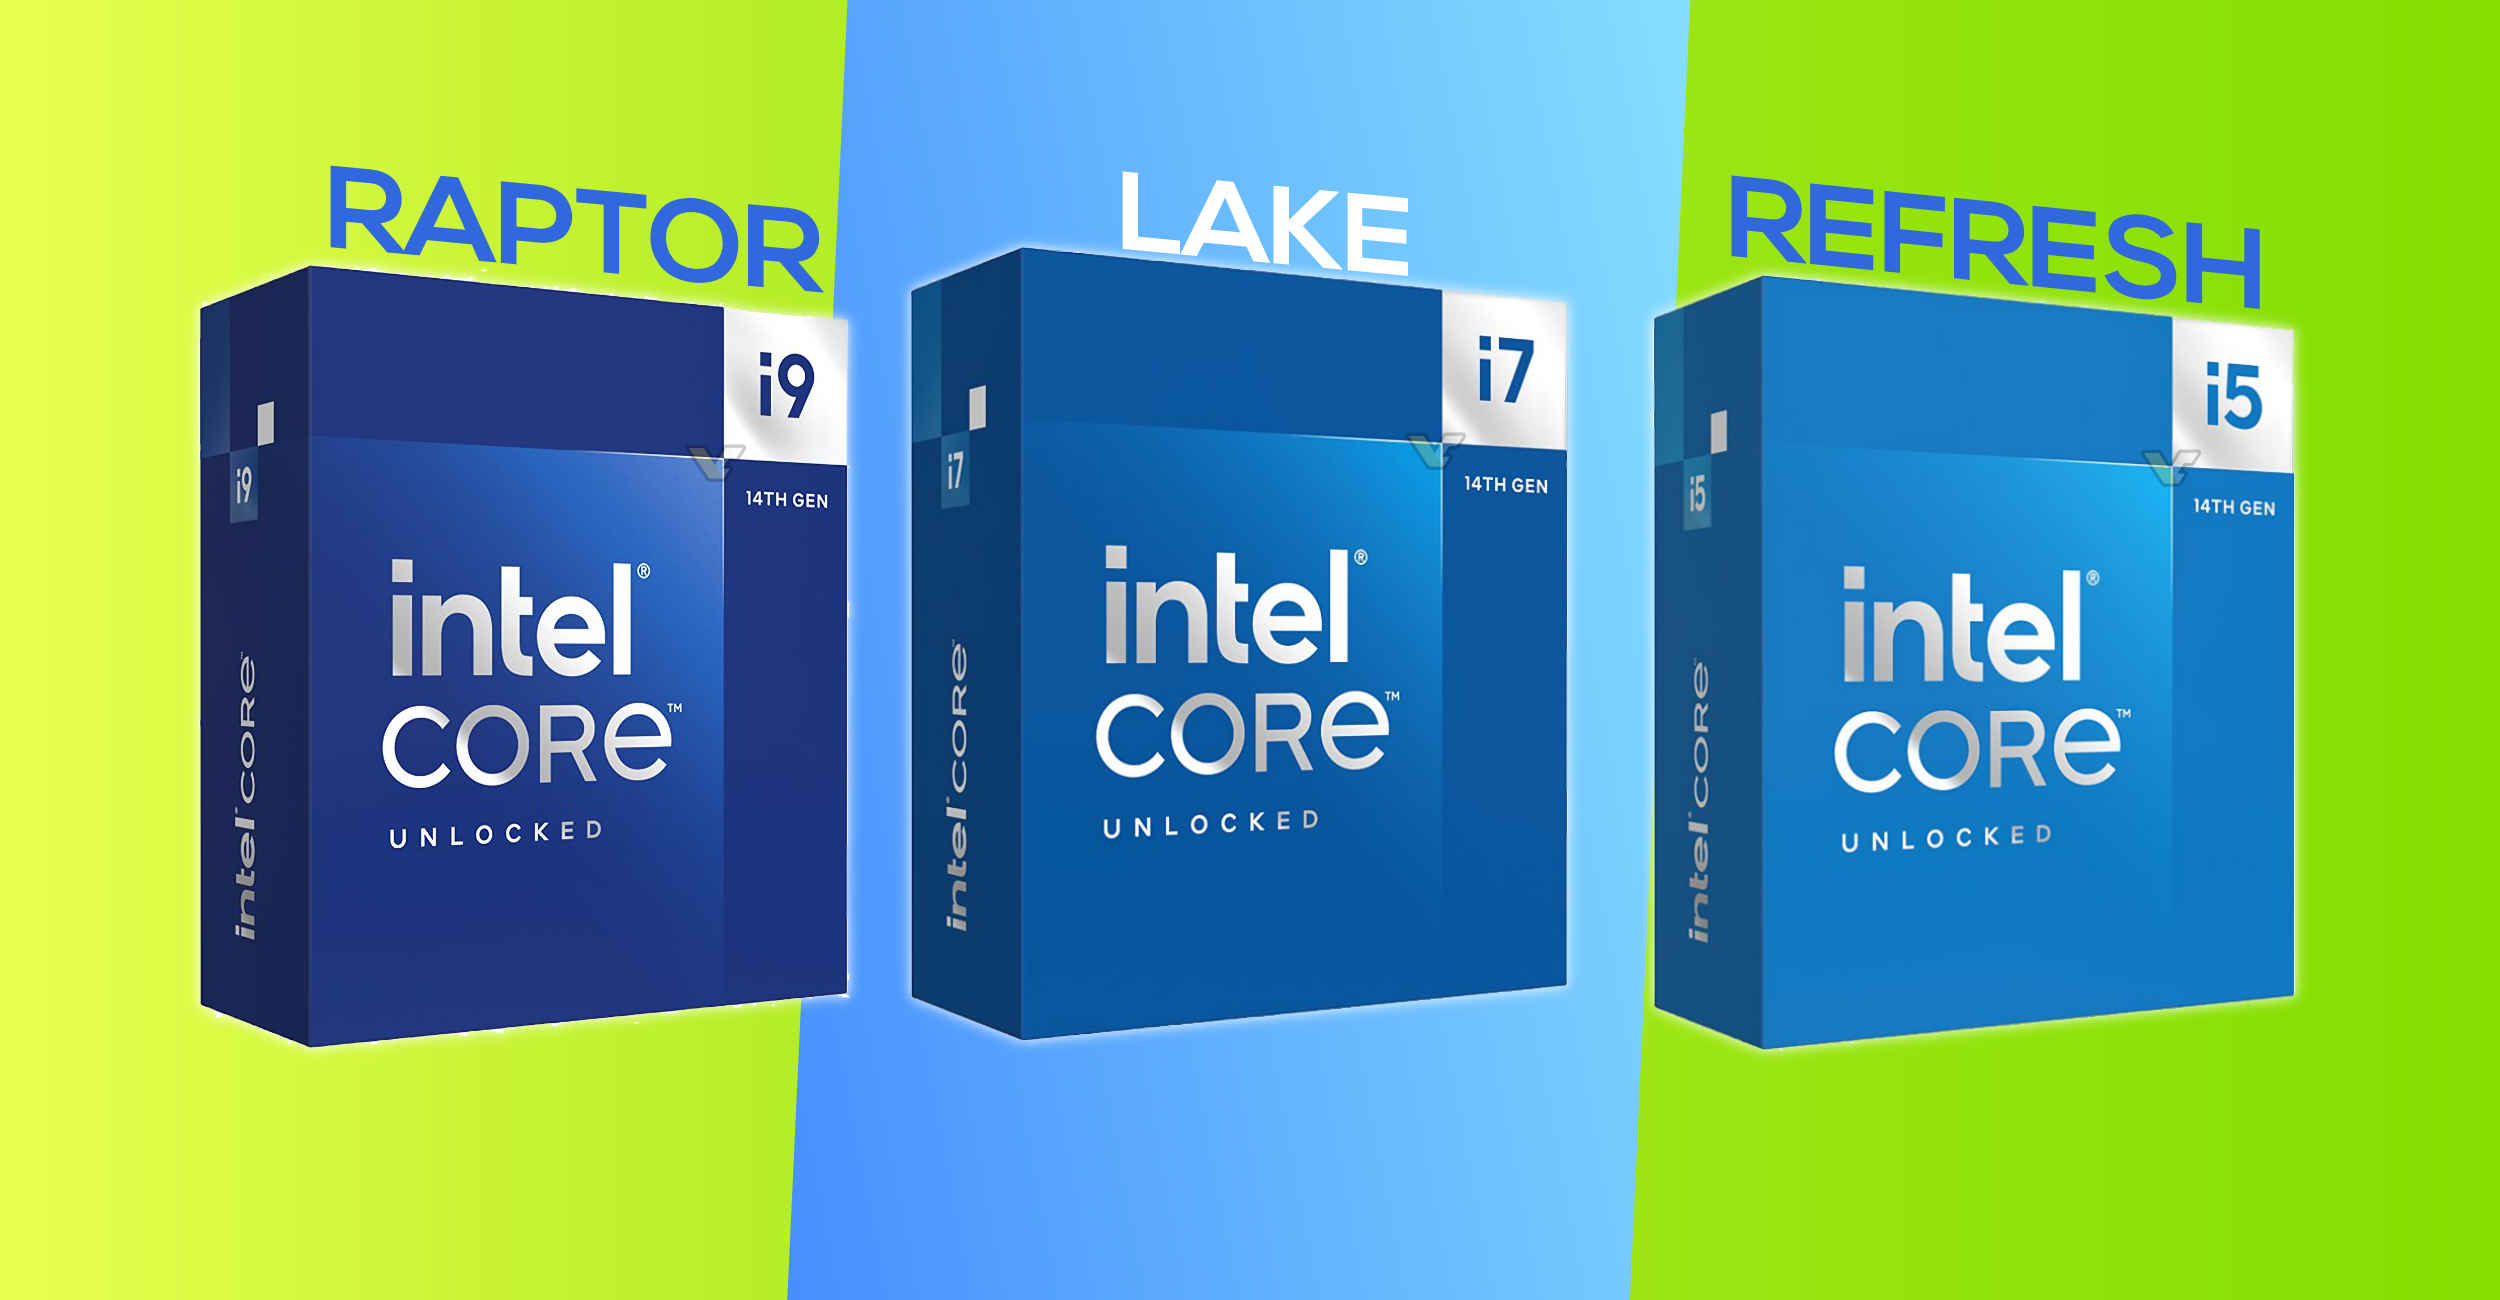 Intel Core i9-14900K review: Better to wait for Arrow Lake 